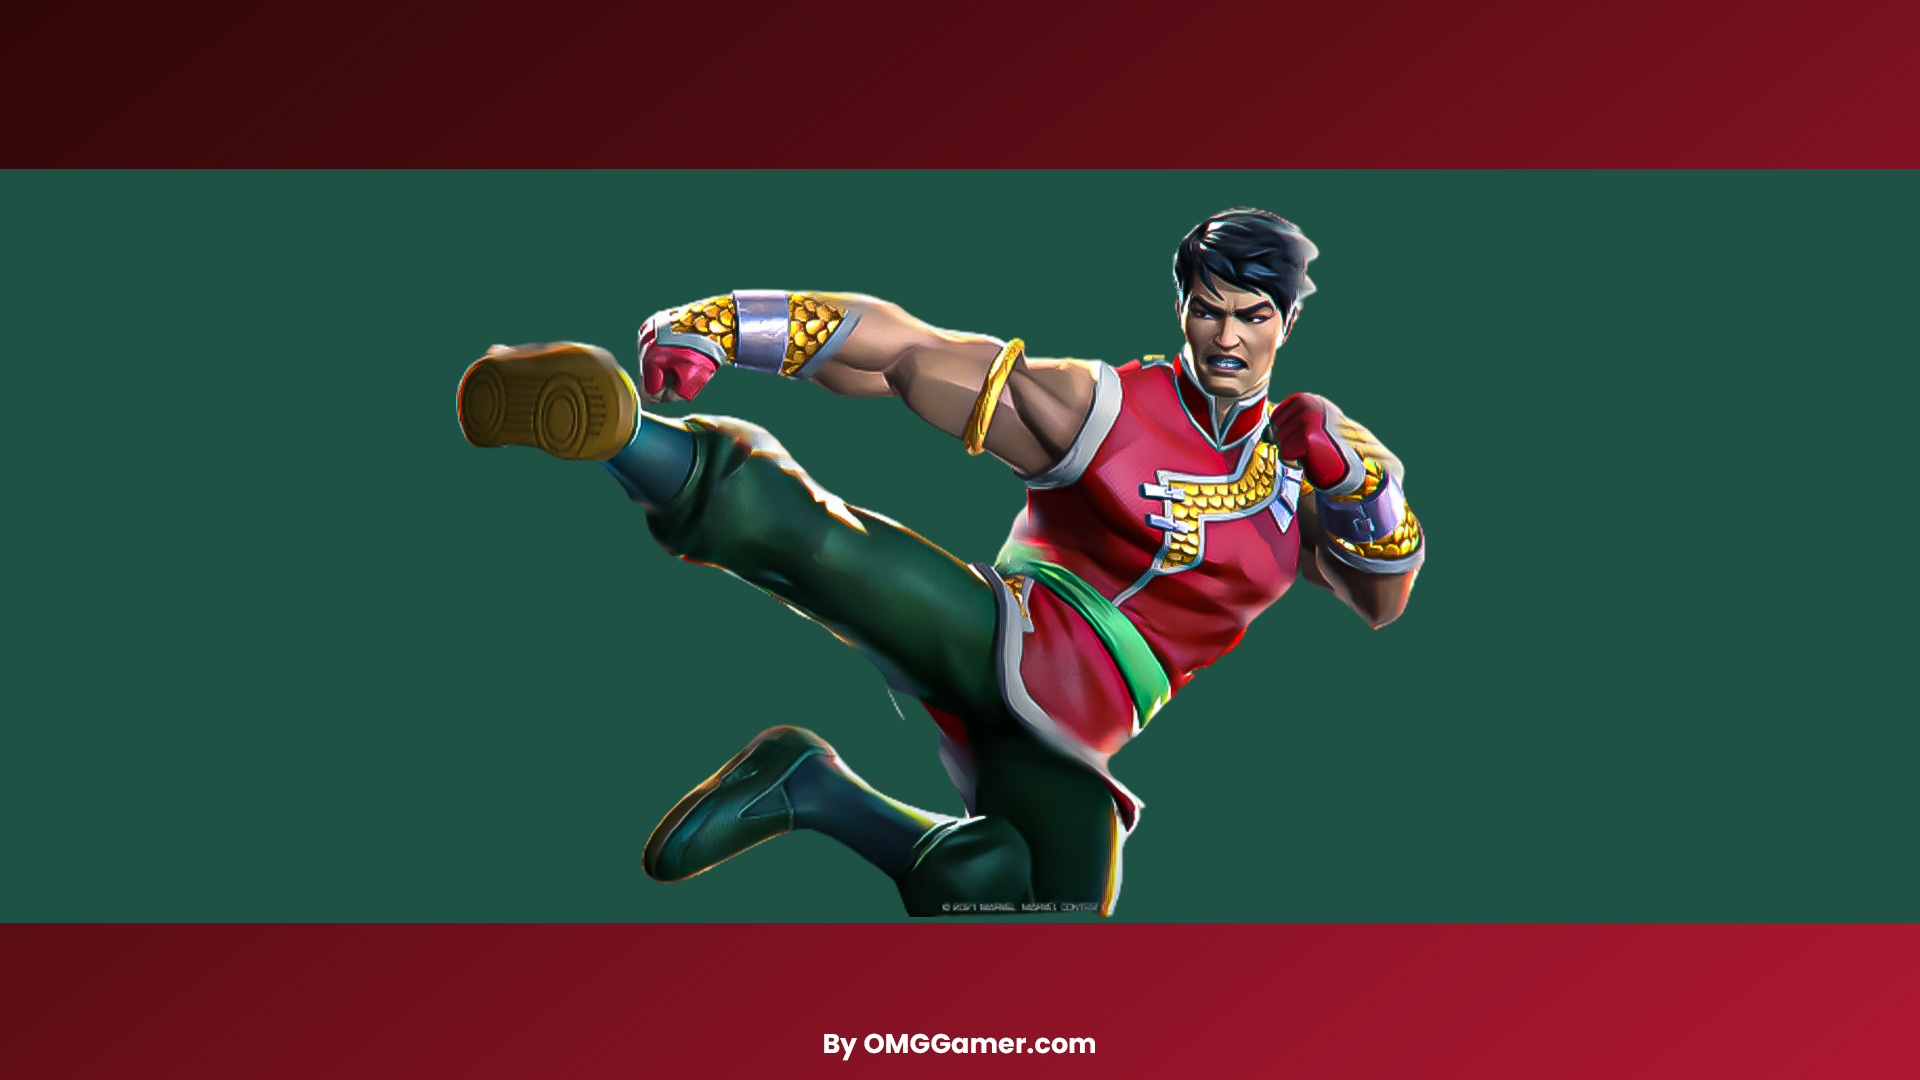 Shang_Chi: Marvel Contest of Champion